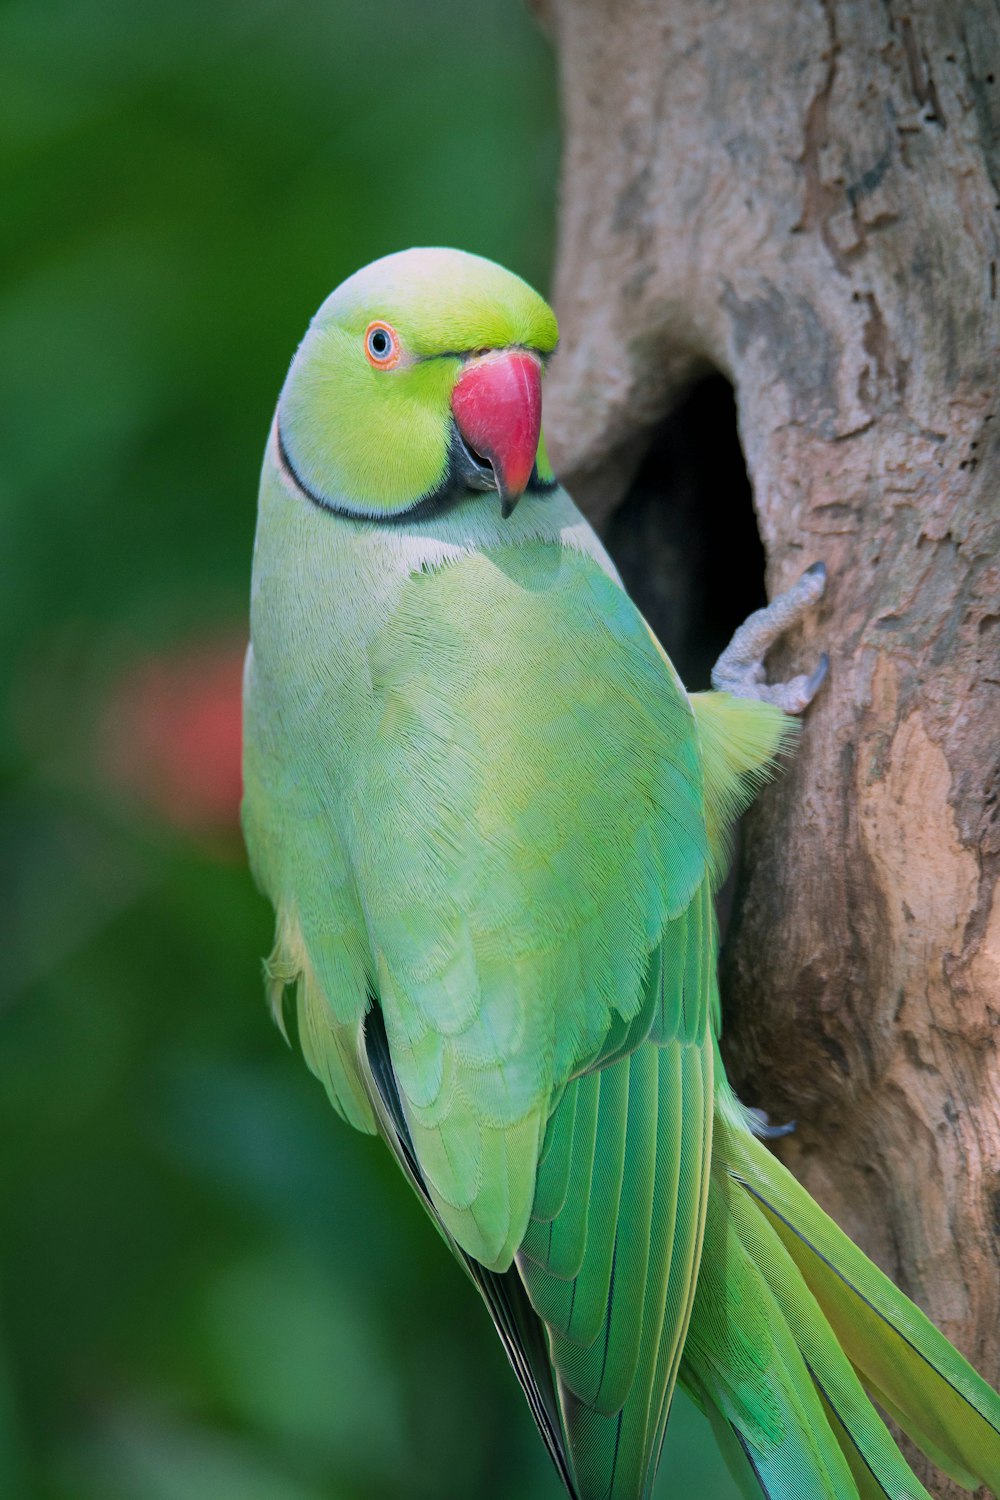 “Stunning Compilation of Green Parrot Images in Full 4K Quality – Over 999 Pictures”